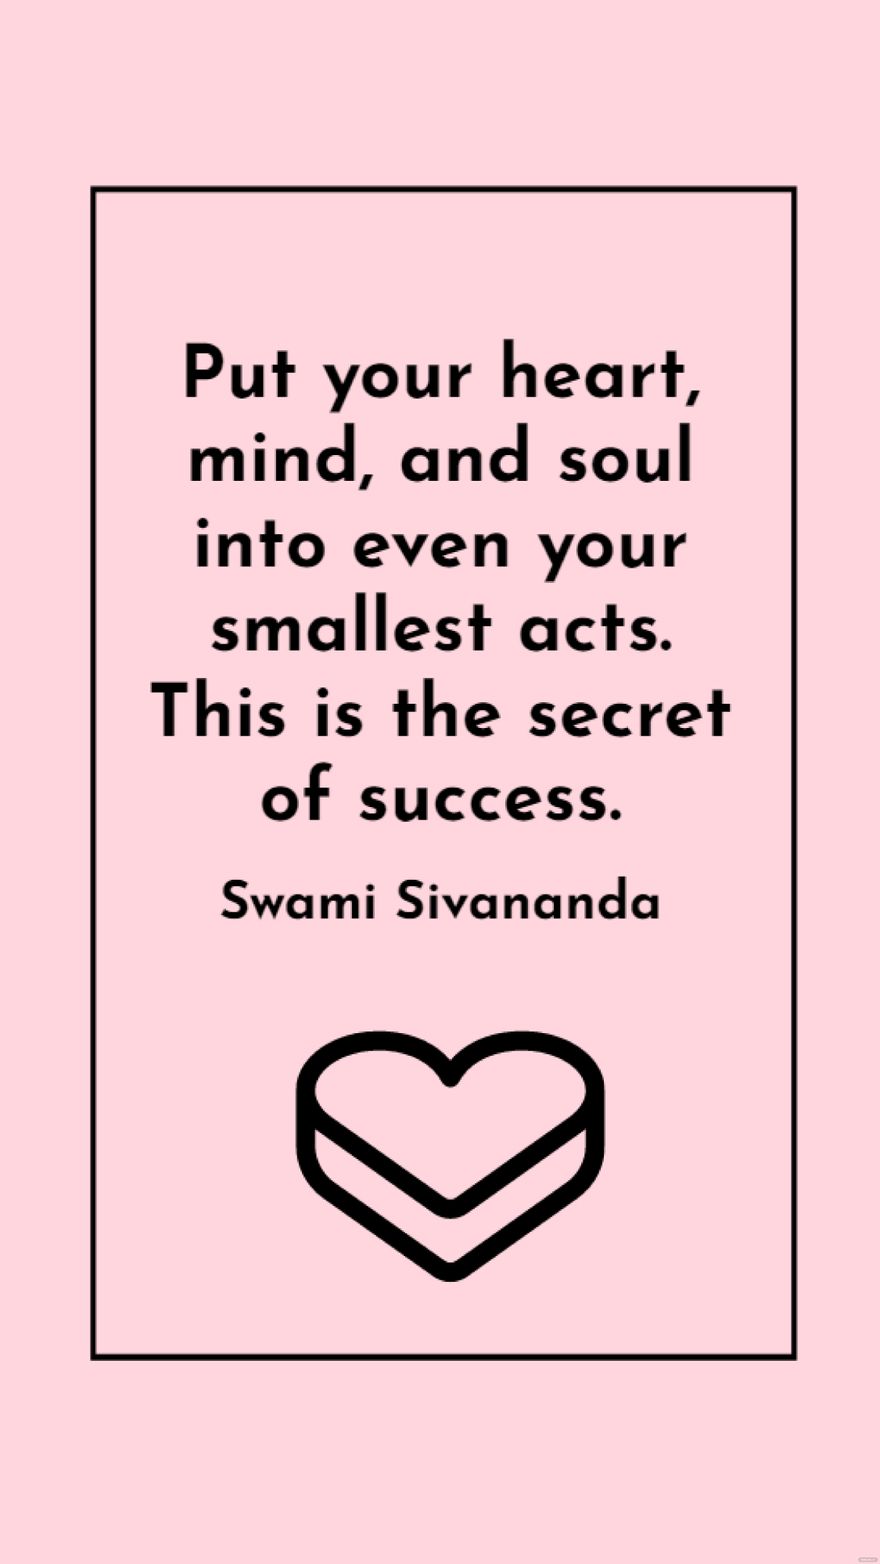 Swami Sivananda - Put your heart, mind, and soul into even your smallest acts. This is the secret of success.